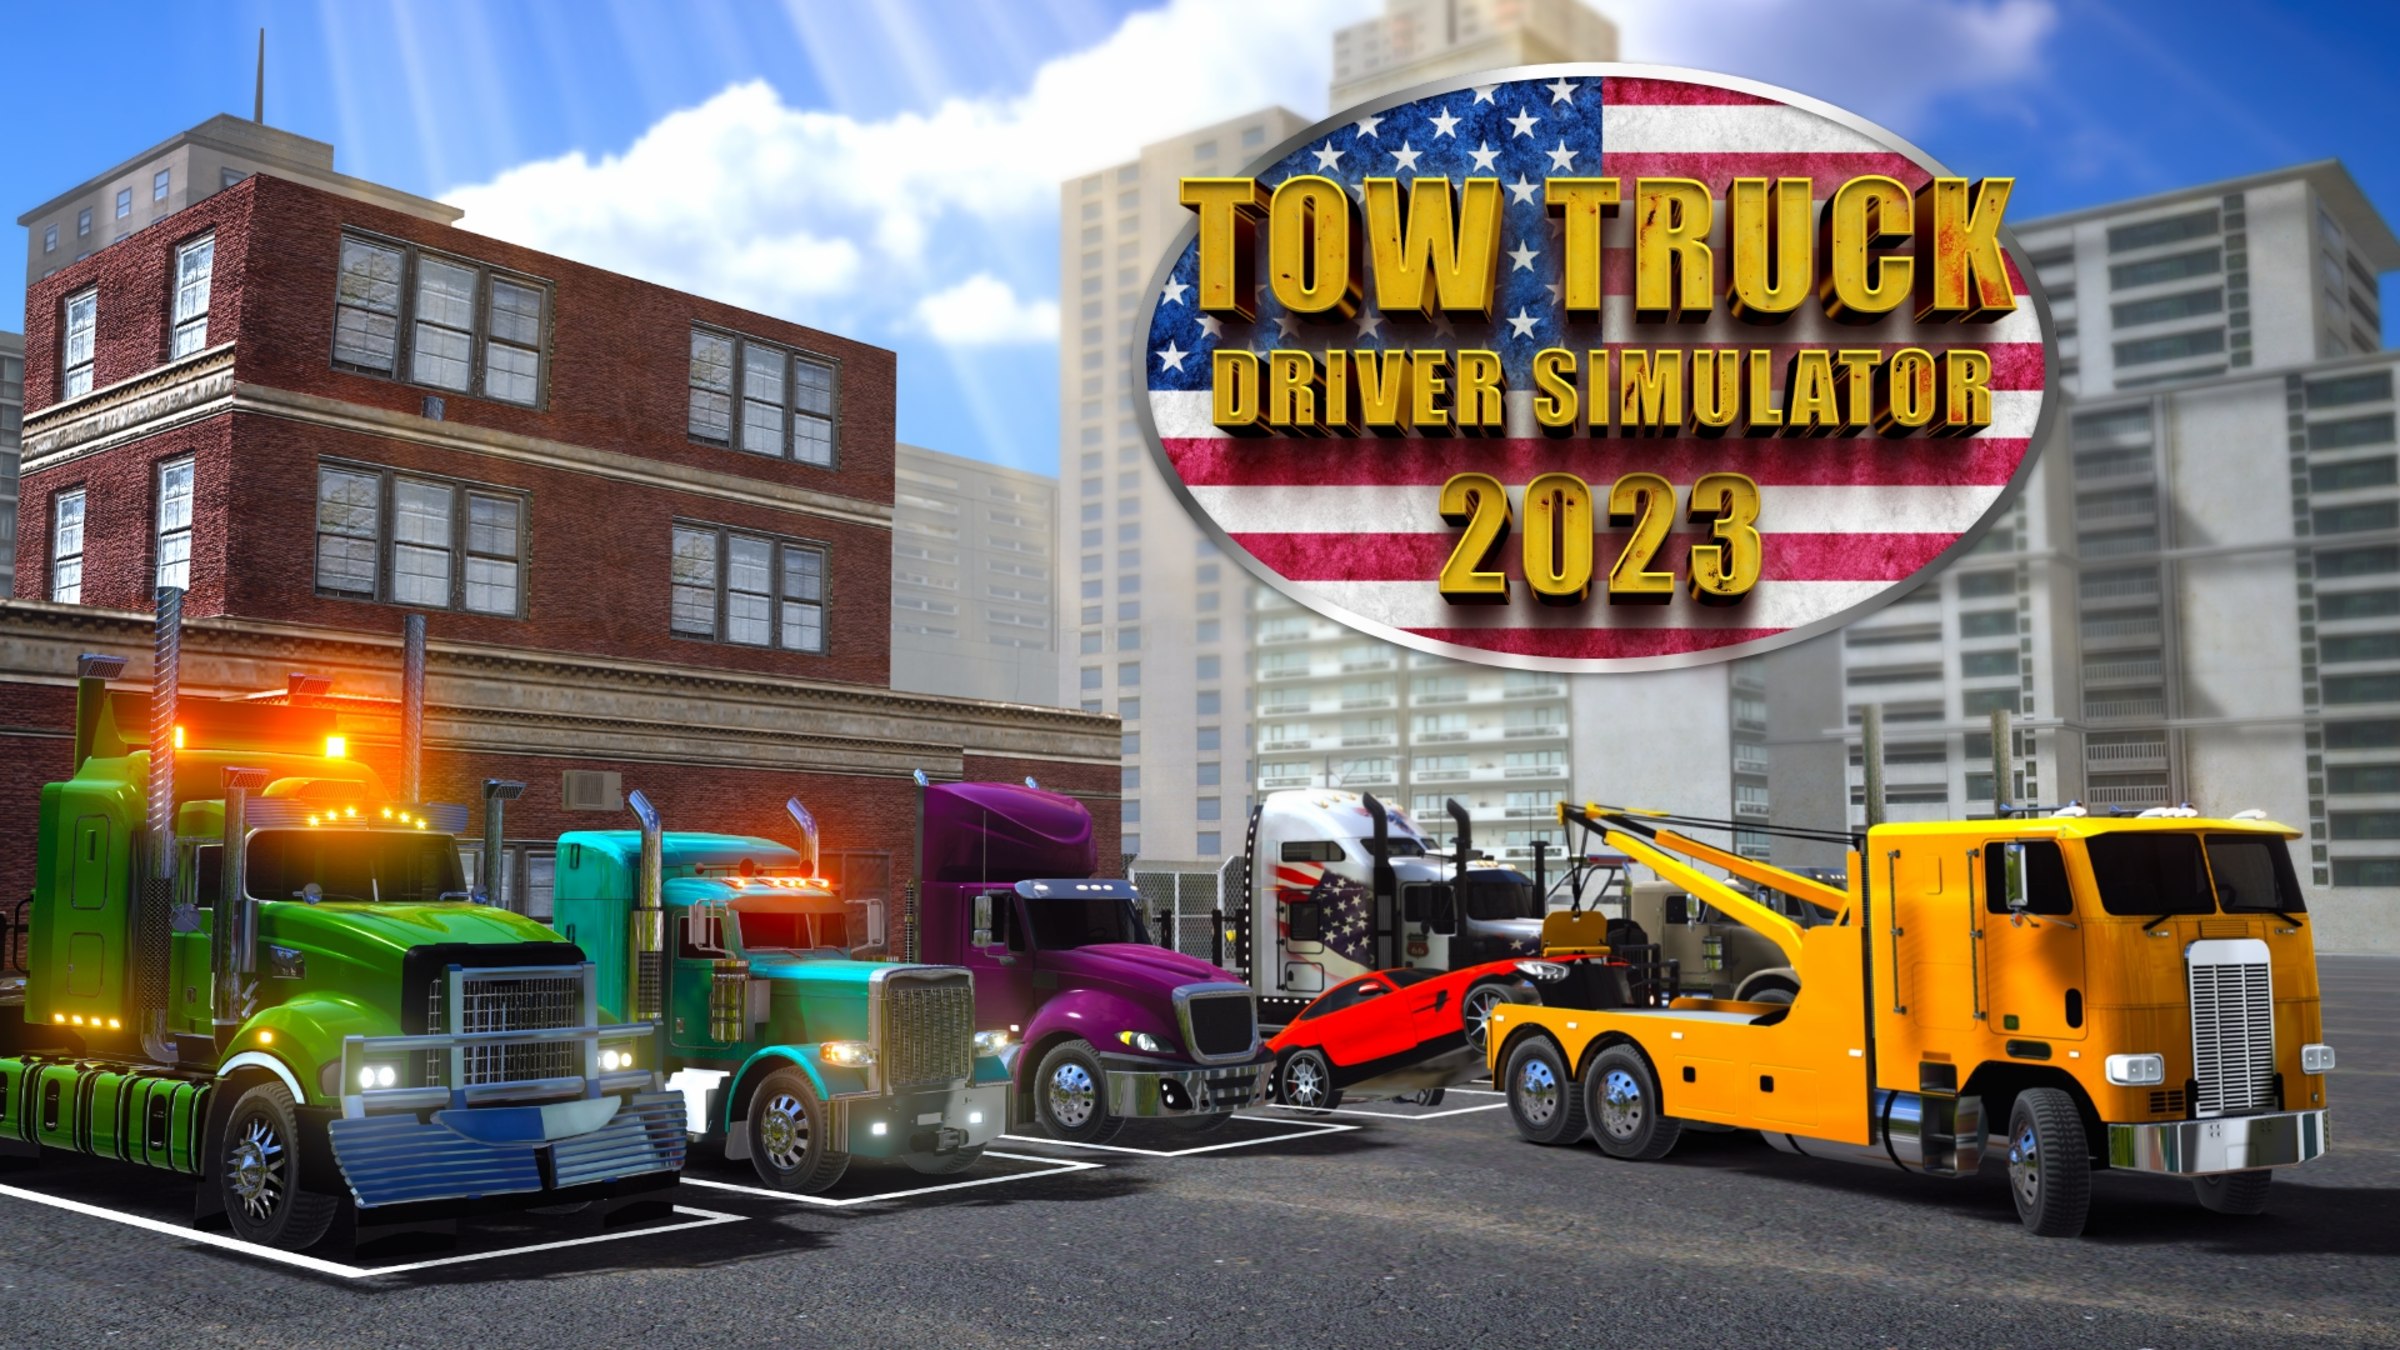 TOW TRUCK Driver Simulator 2023 for Nintendo Switch - Nintendo Official Site